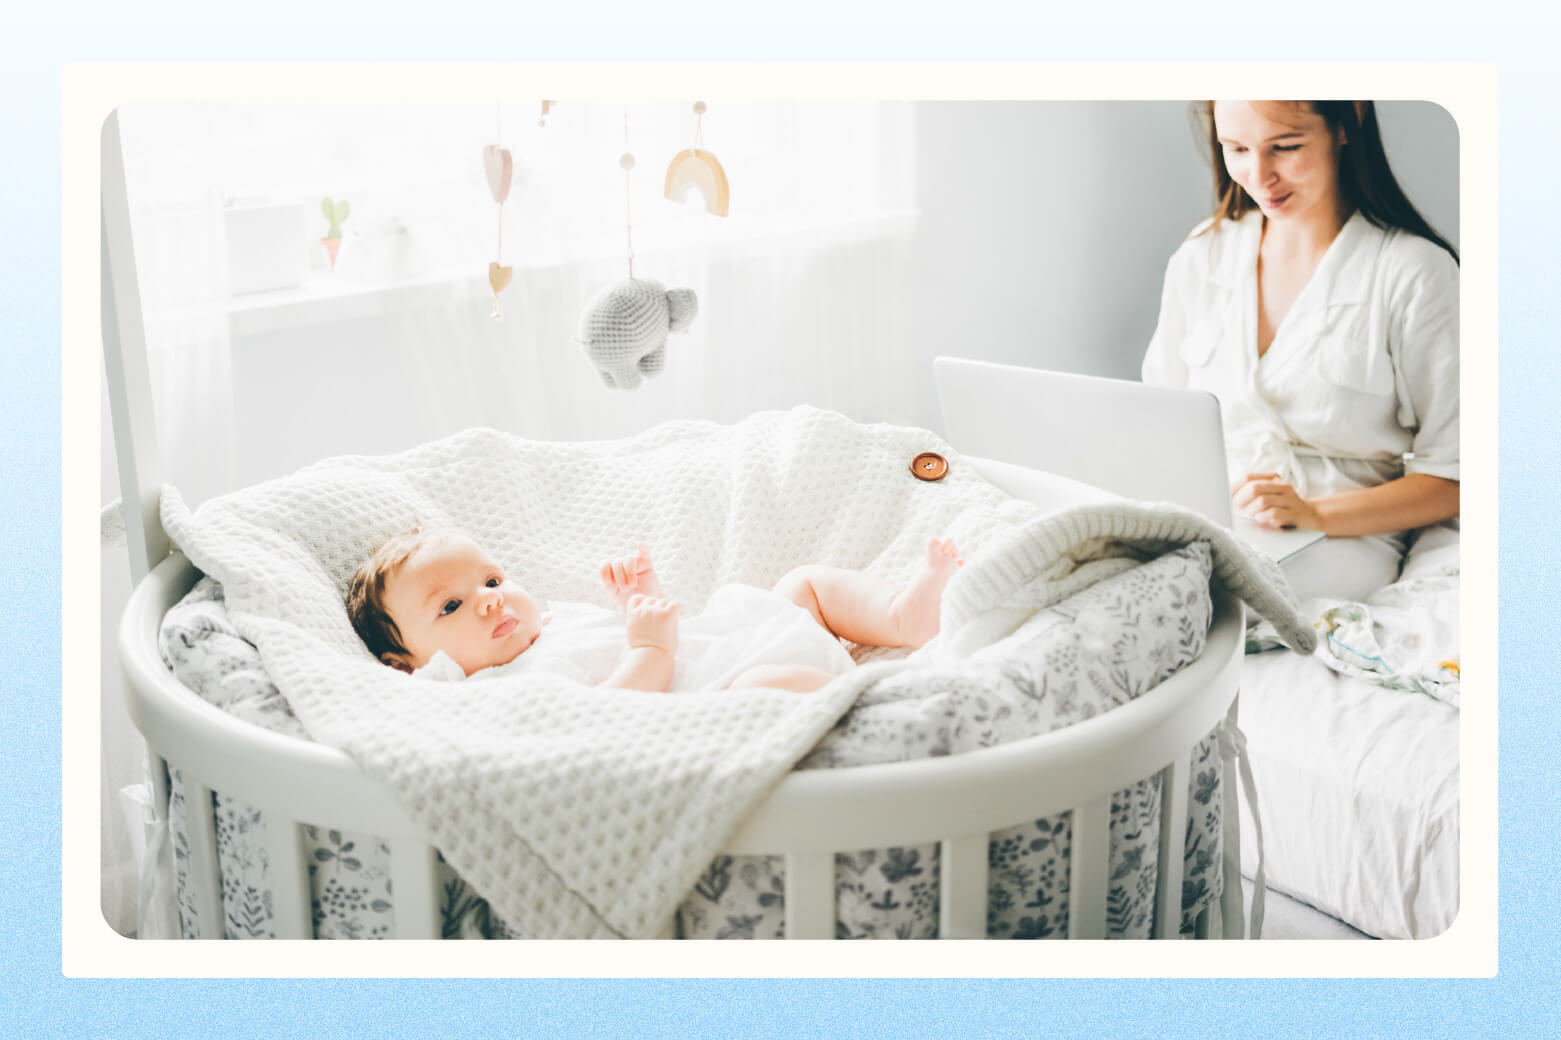 Woman on laptop sitting next to oval-shaped crib with baby laying inside of it on fluffy blankets